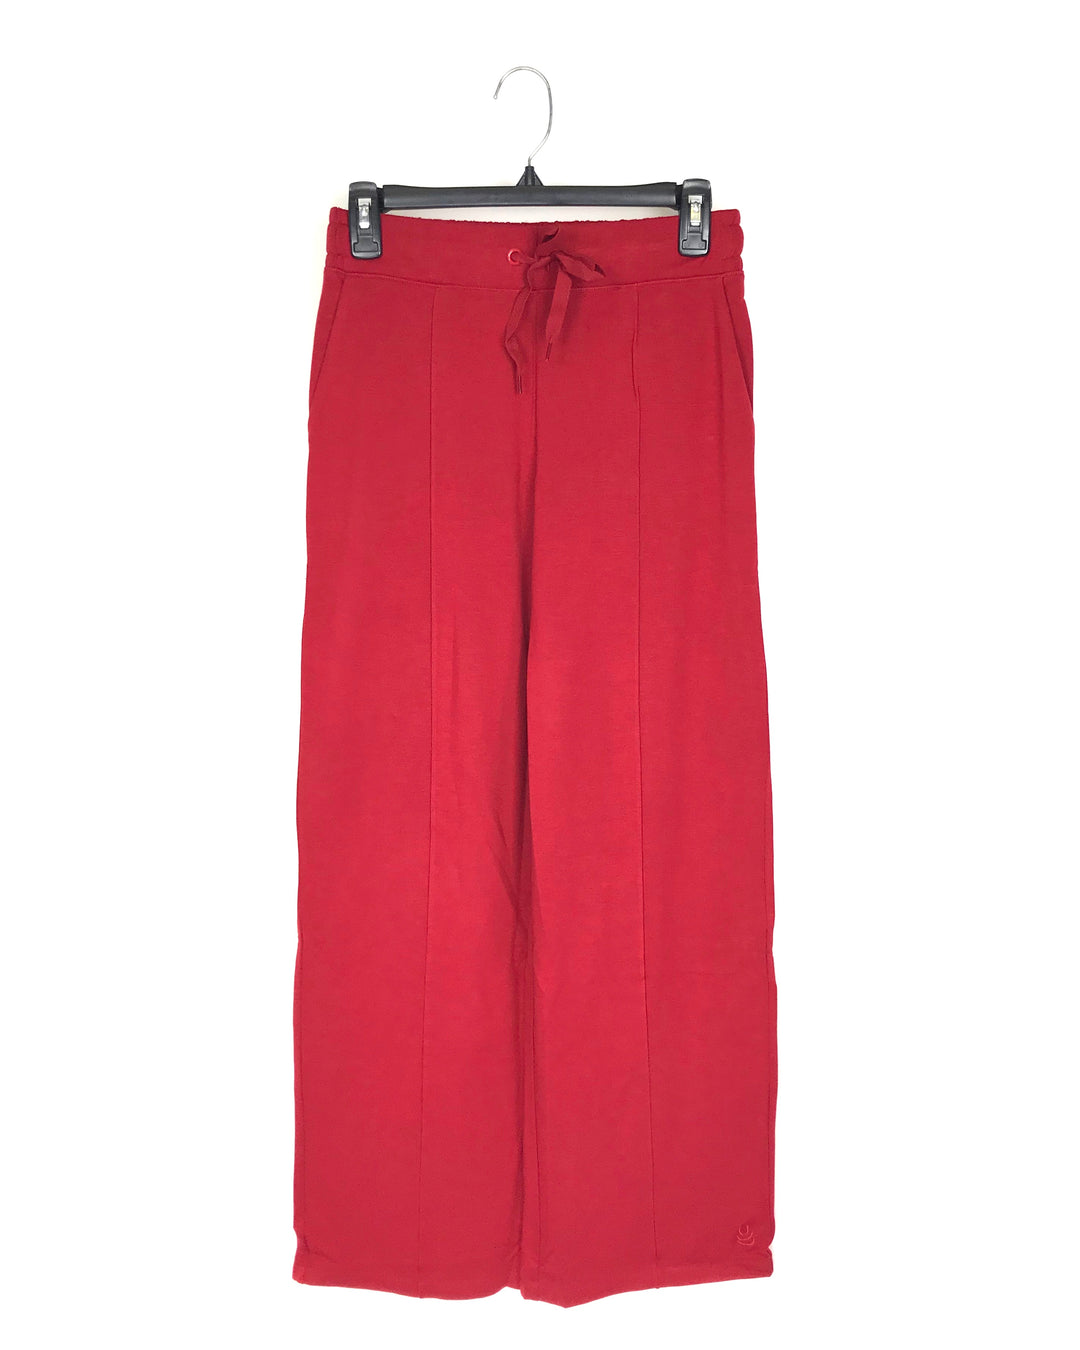 Red Sweat Pants - Extra Small and Small